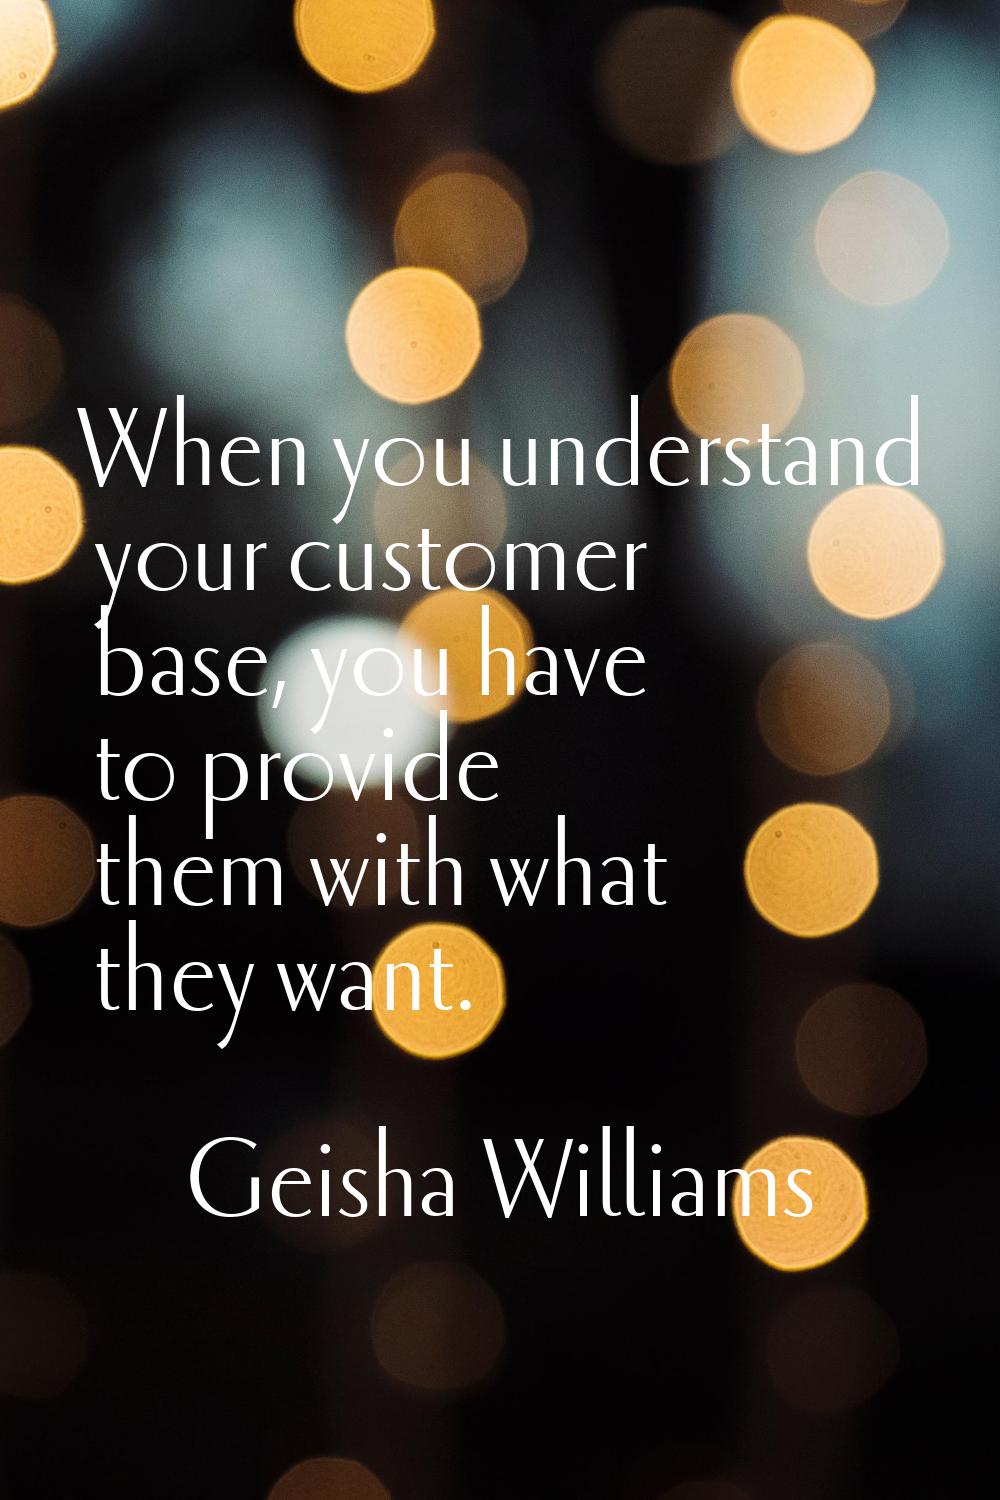 When you understand your customer base, you have to provide them with what they want.